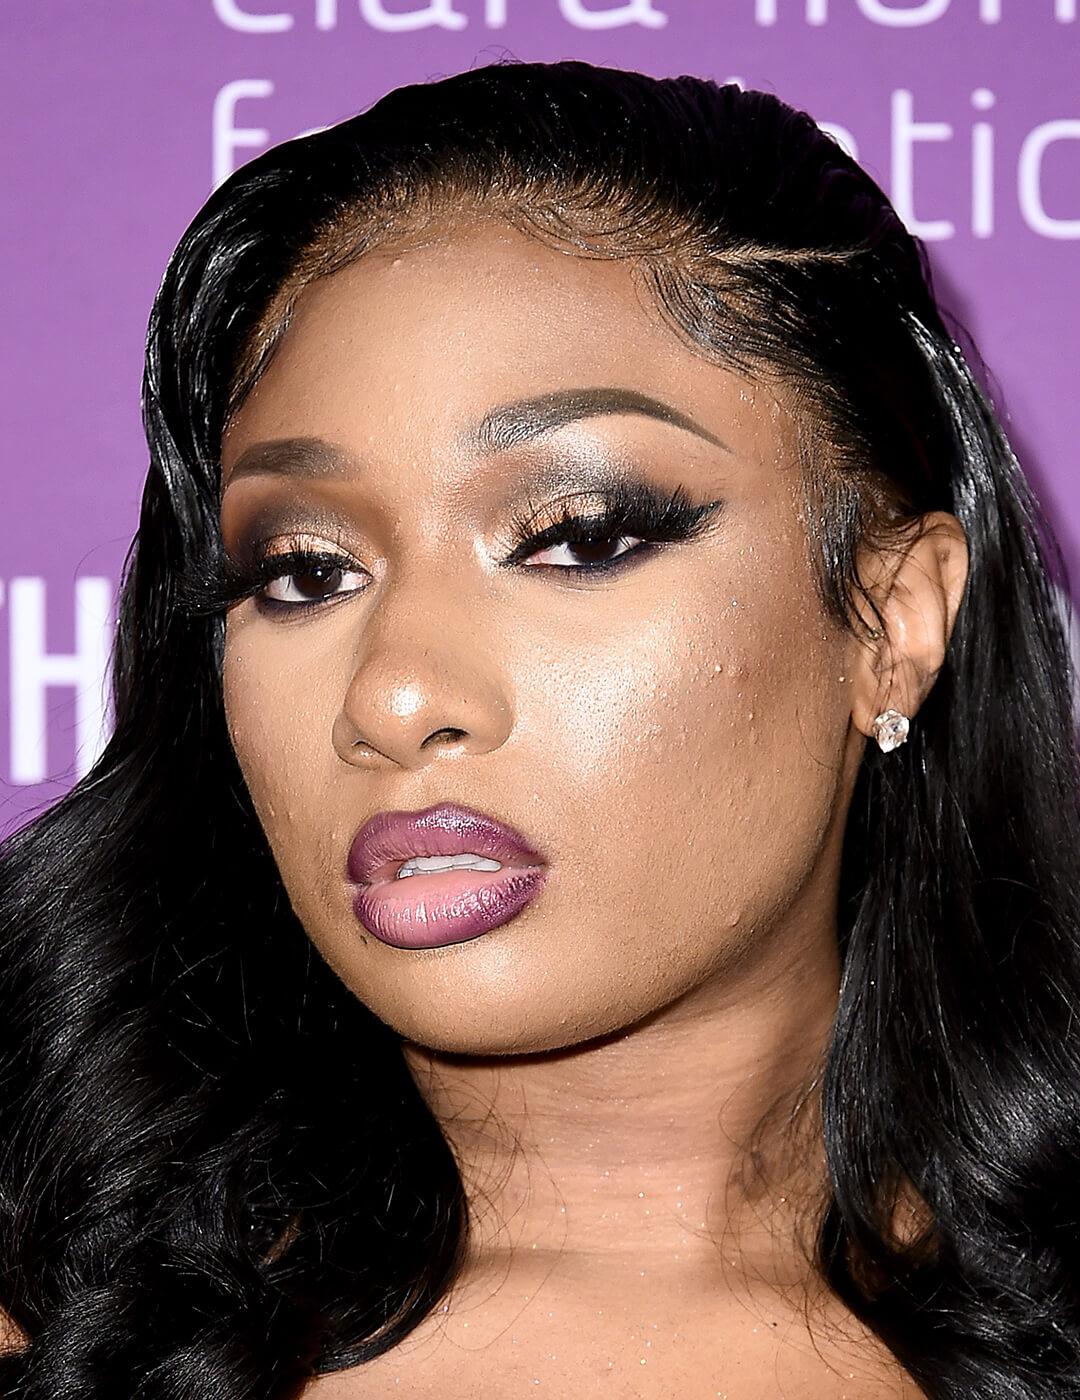 Megan Thee Stallion looking glam with a smoky eye makeup look at the red carpet